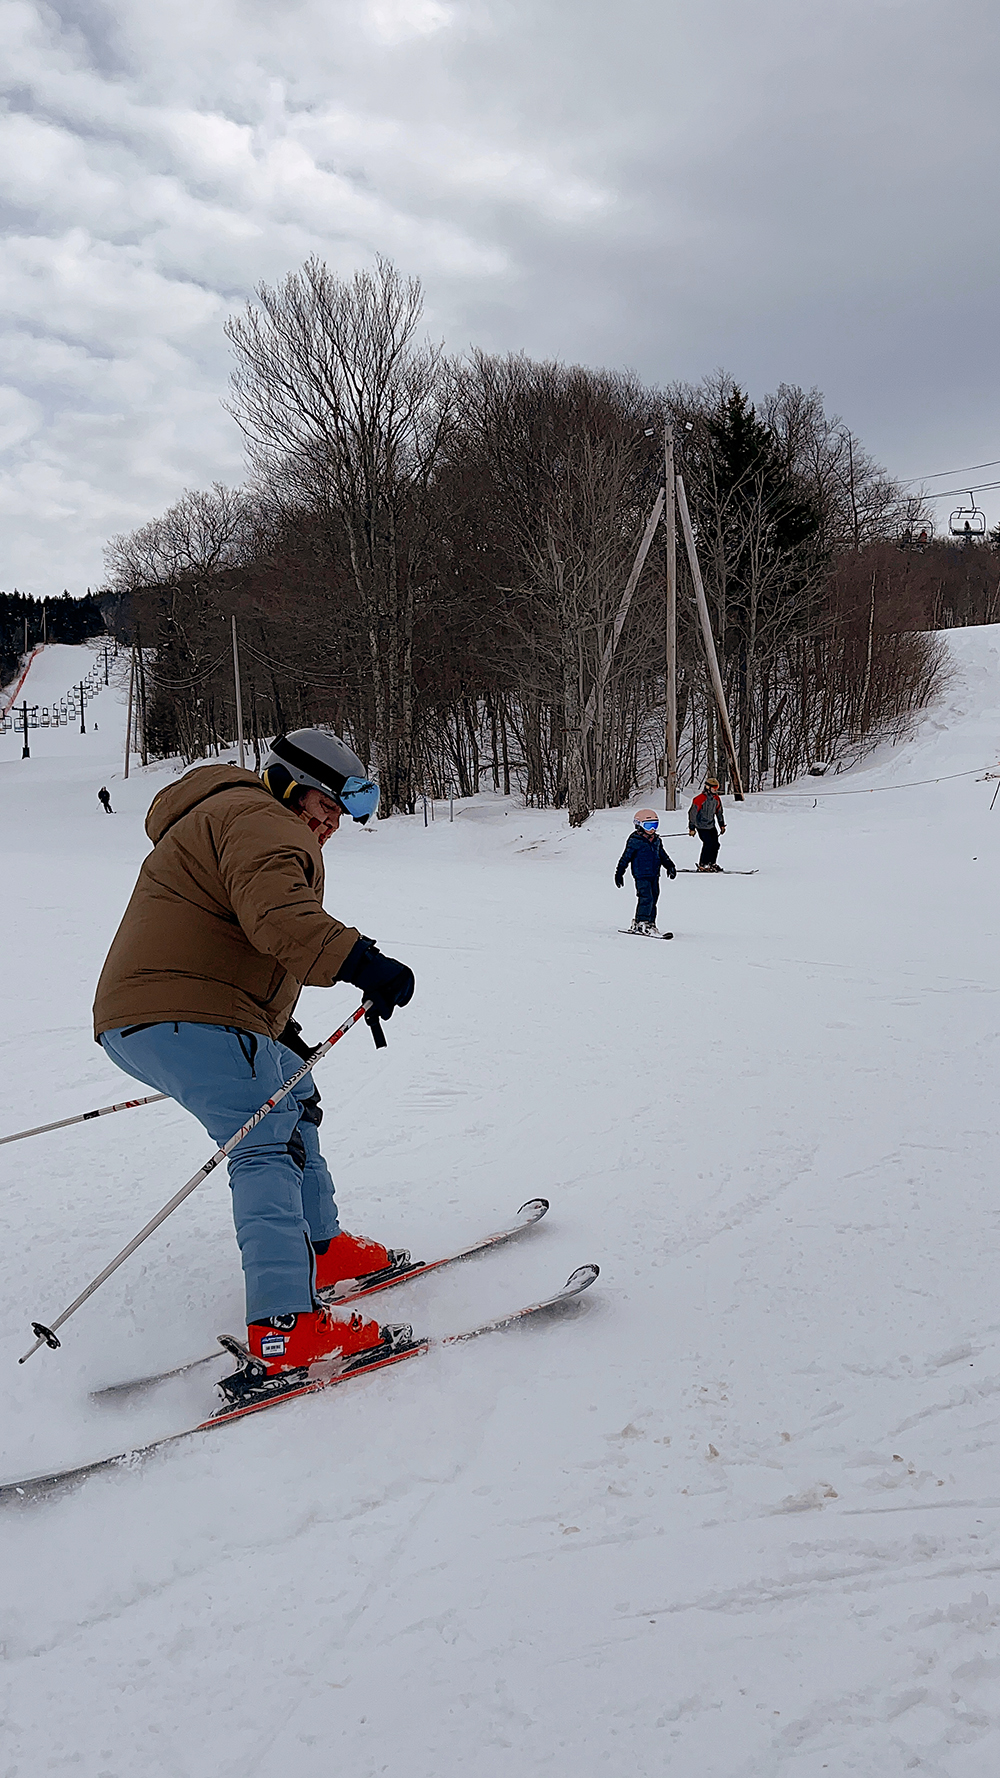 Winter Travel Guide- the Best Things to Do in Bolton Valley VT with your Family by Tabitha Blue - Ski Bolton Valley!